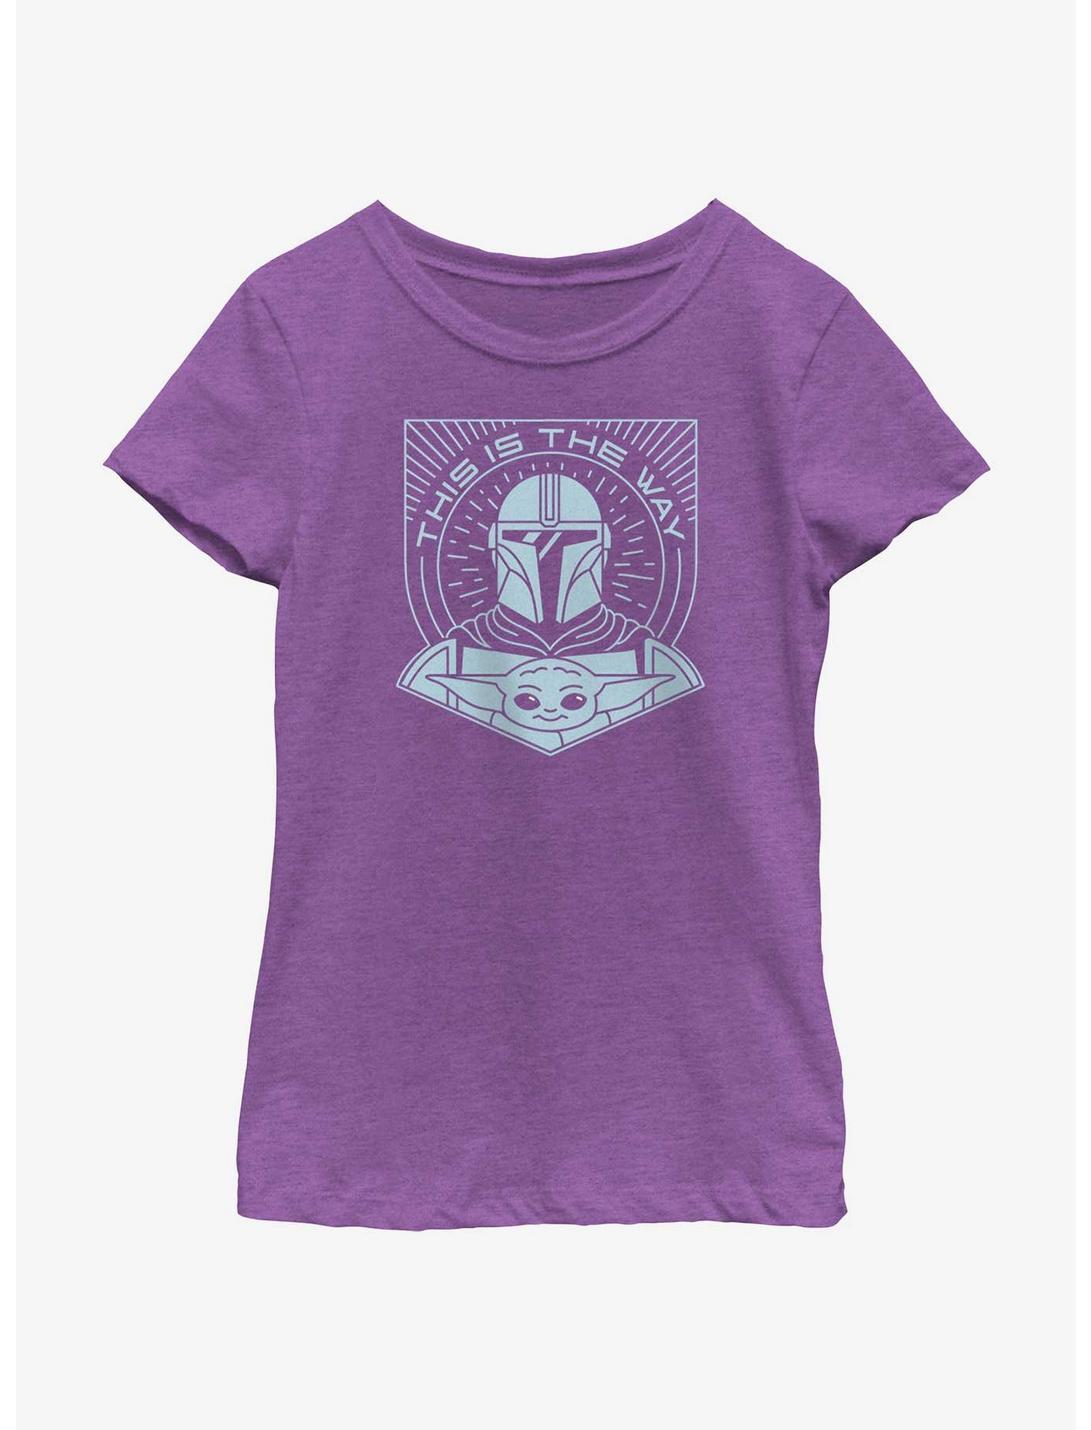 Star Wars The Mandalorian This Is The Way Line Art Youth Girls T-Shirt, PURPLE BERRY, hi-res